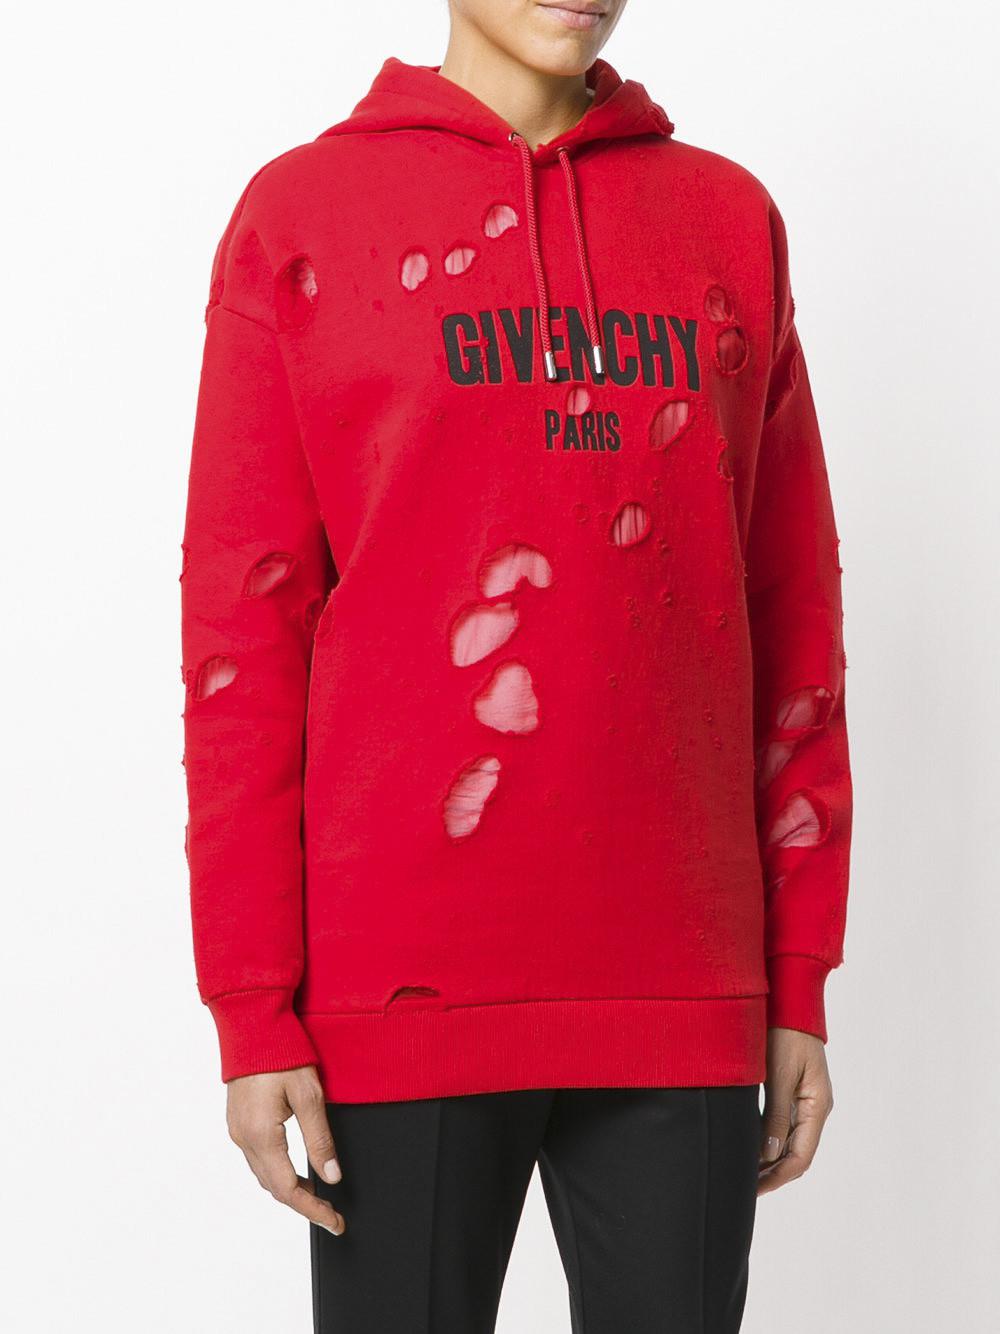 givenchy distressed logo hoodie